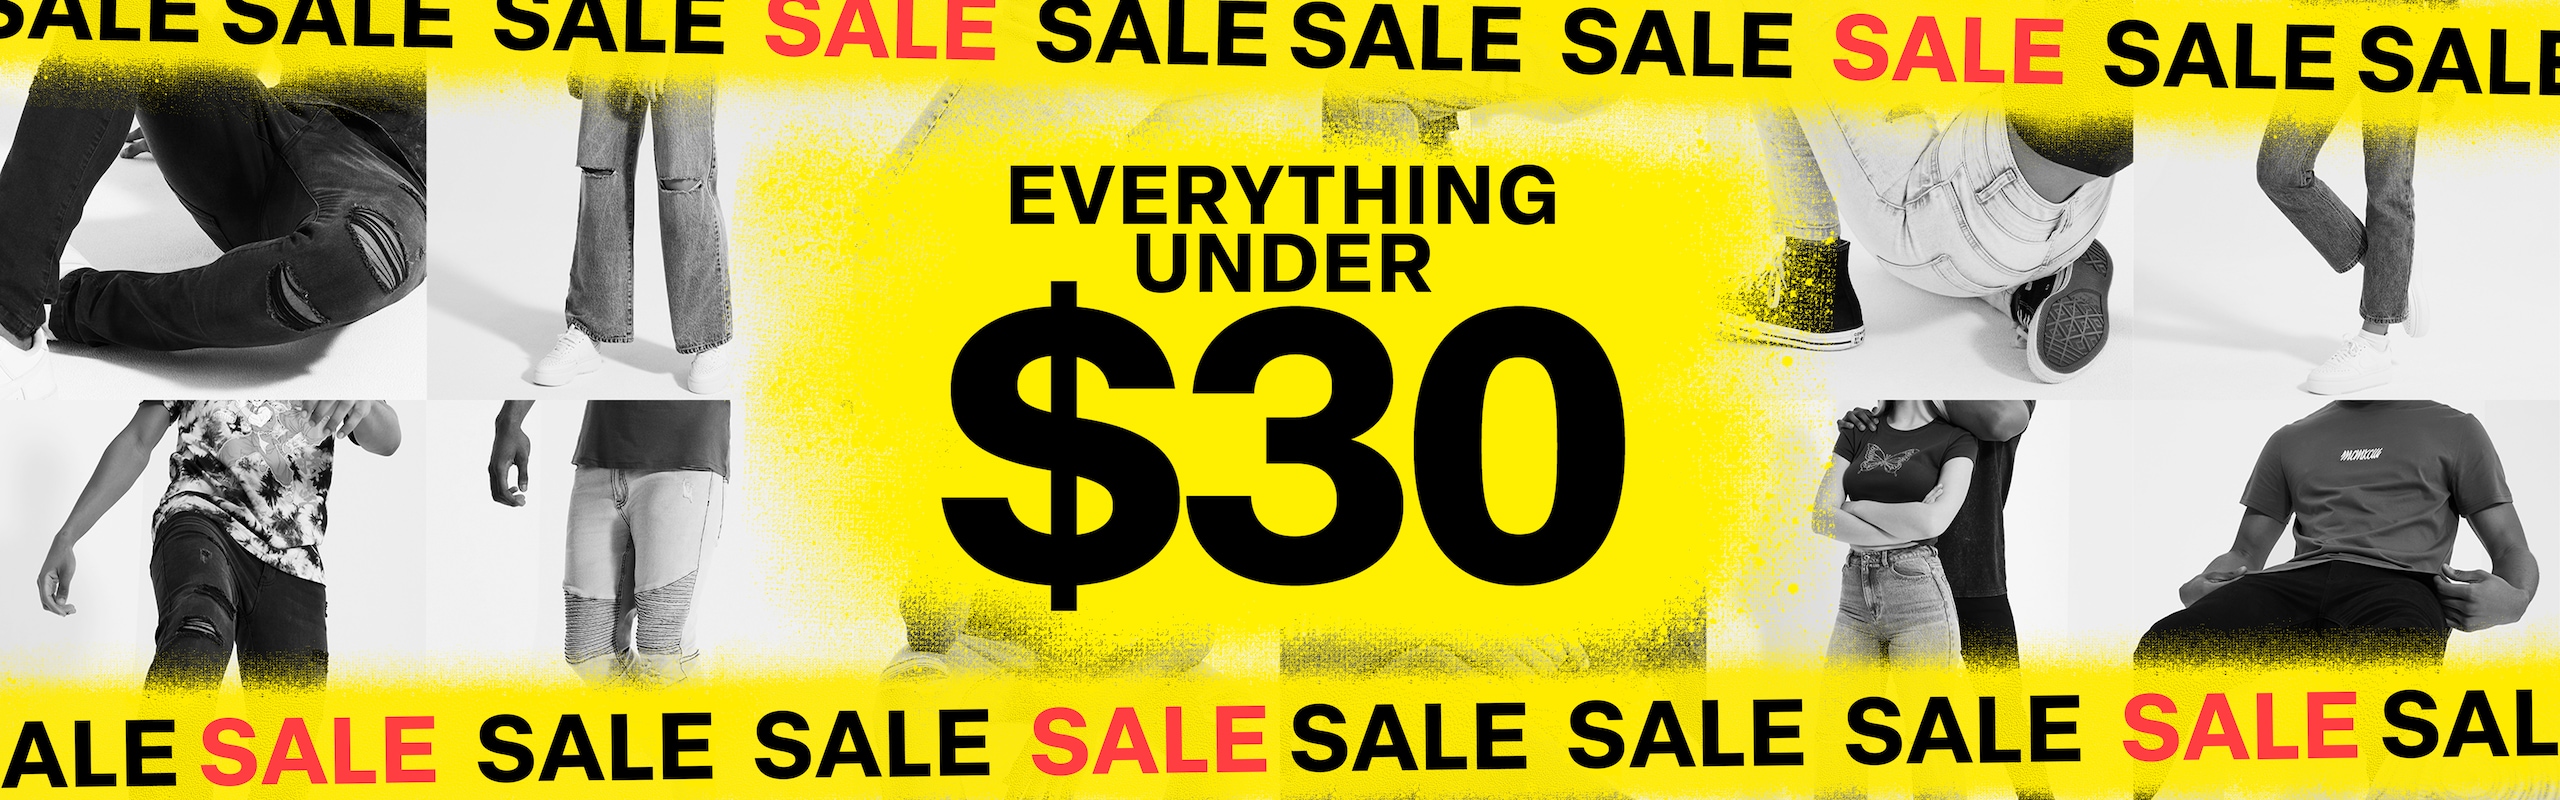 Sale. Nothing over $30.